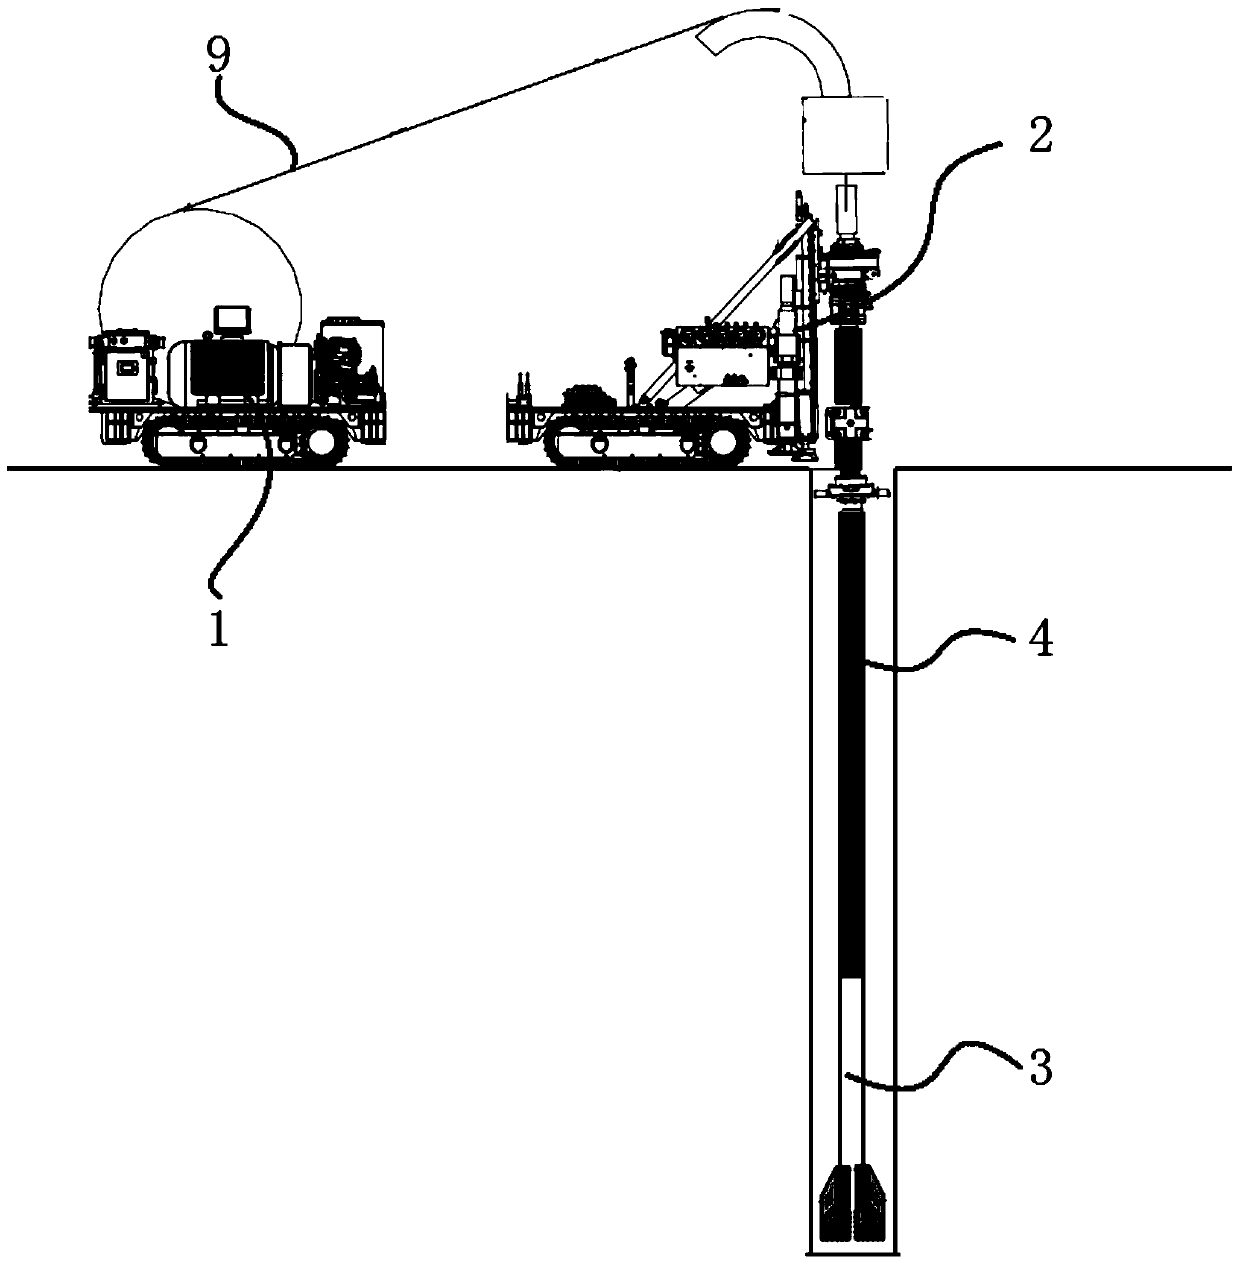 Operation method for tunnel pressure-keeping coring equipment